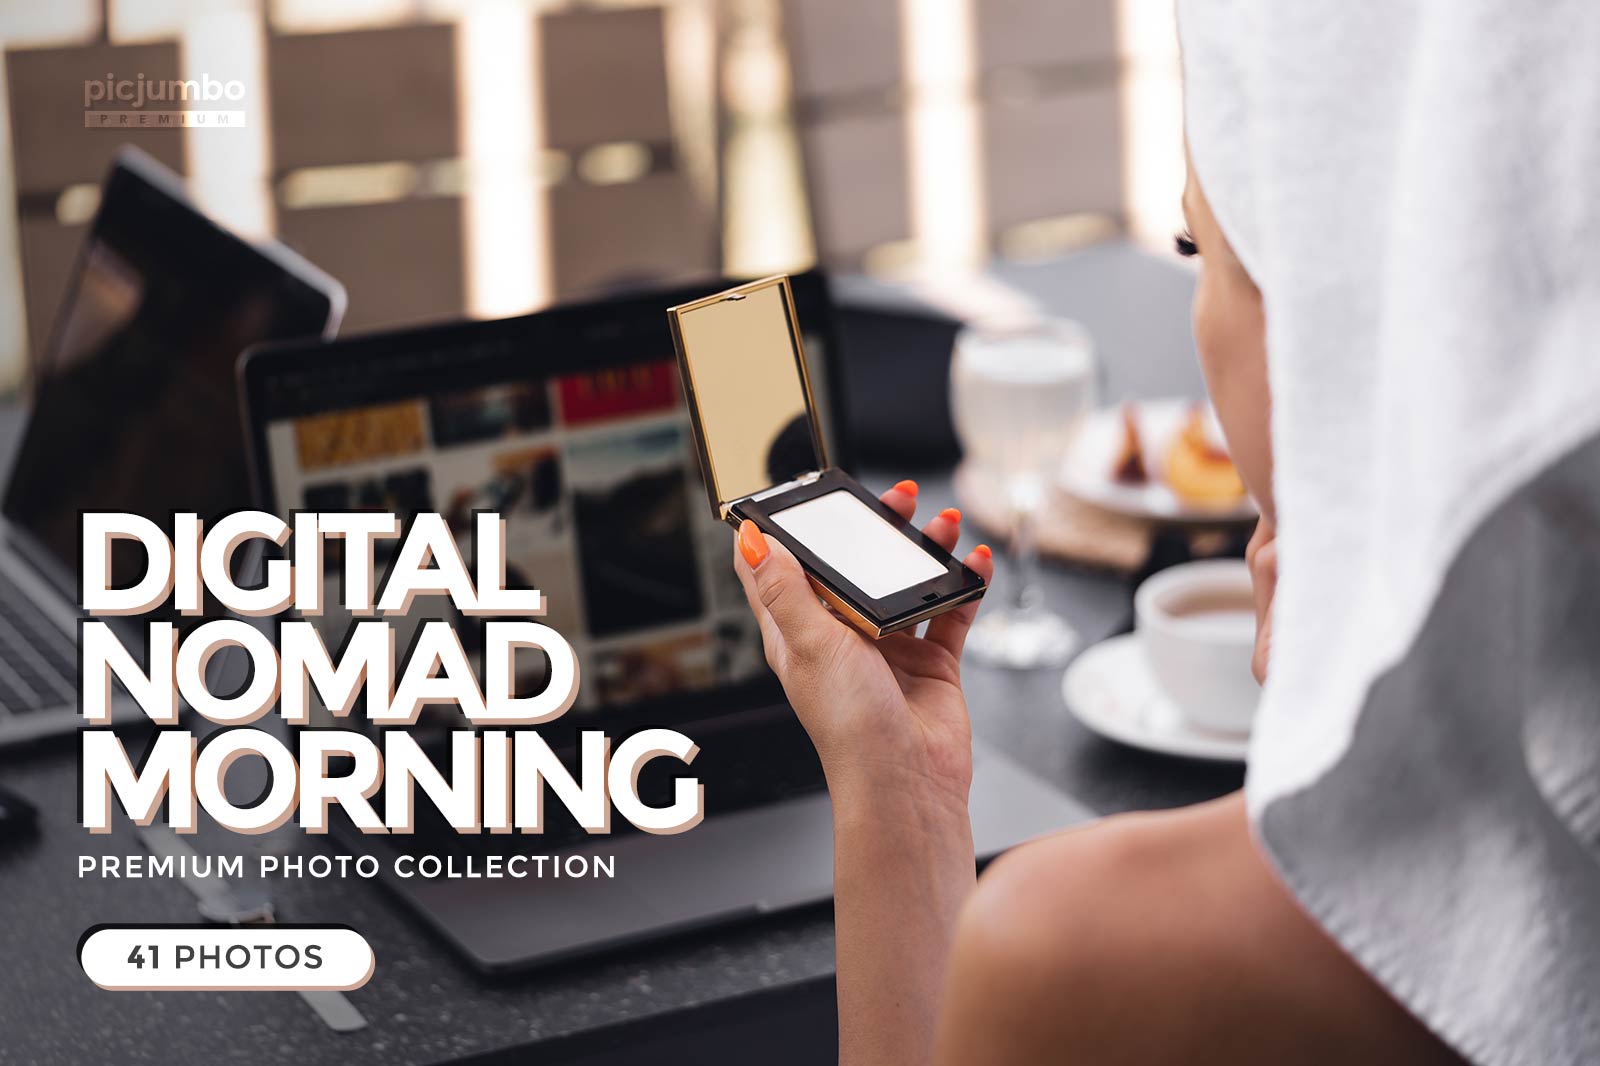 Download hi-res stock photos from our Digital Nomad Morning PREMIUM Collection!